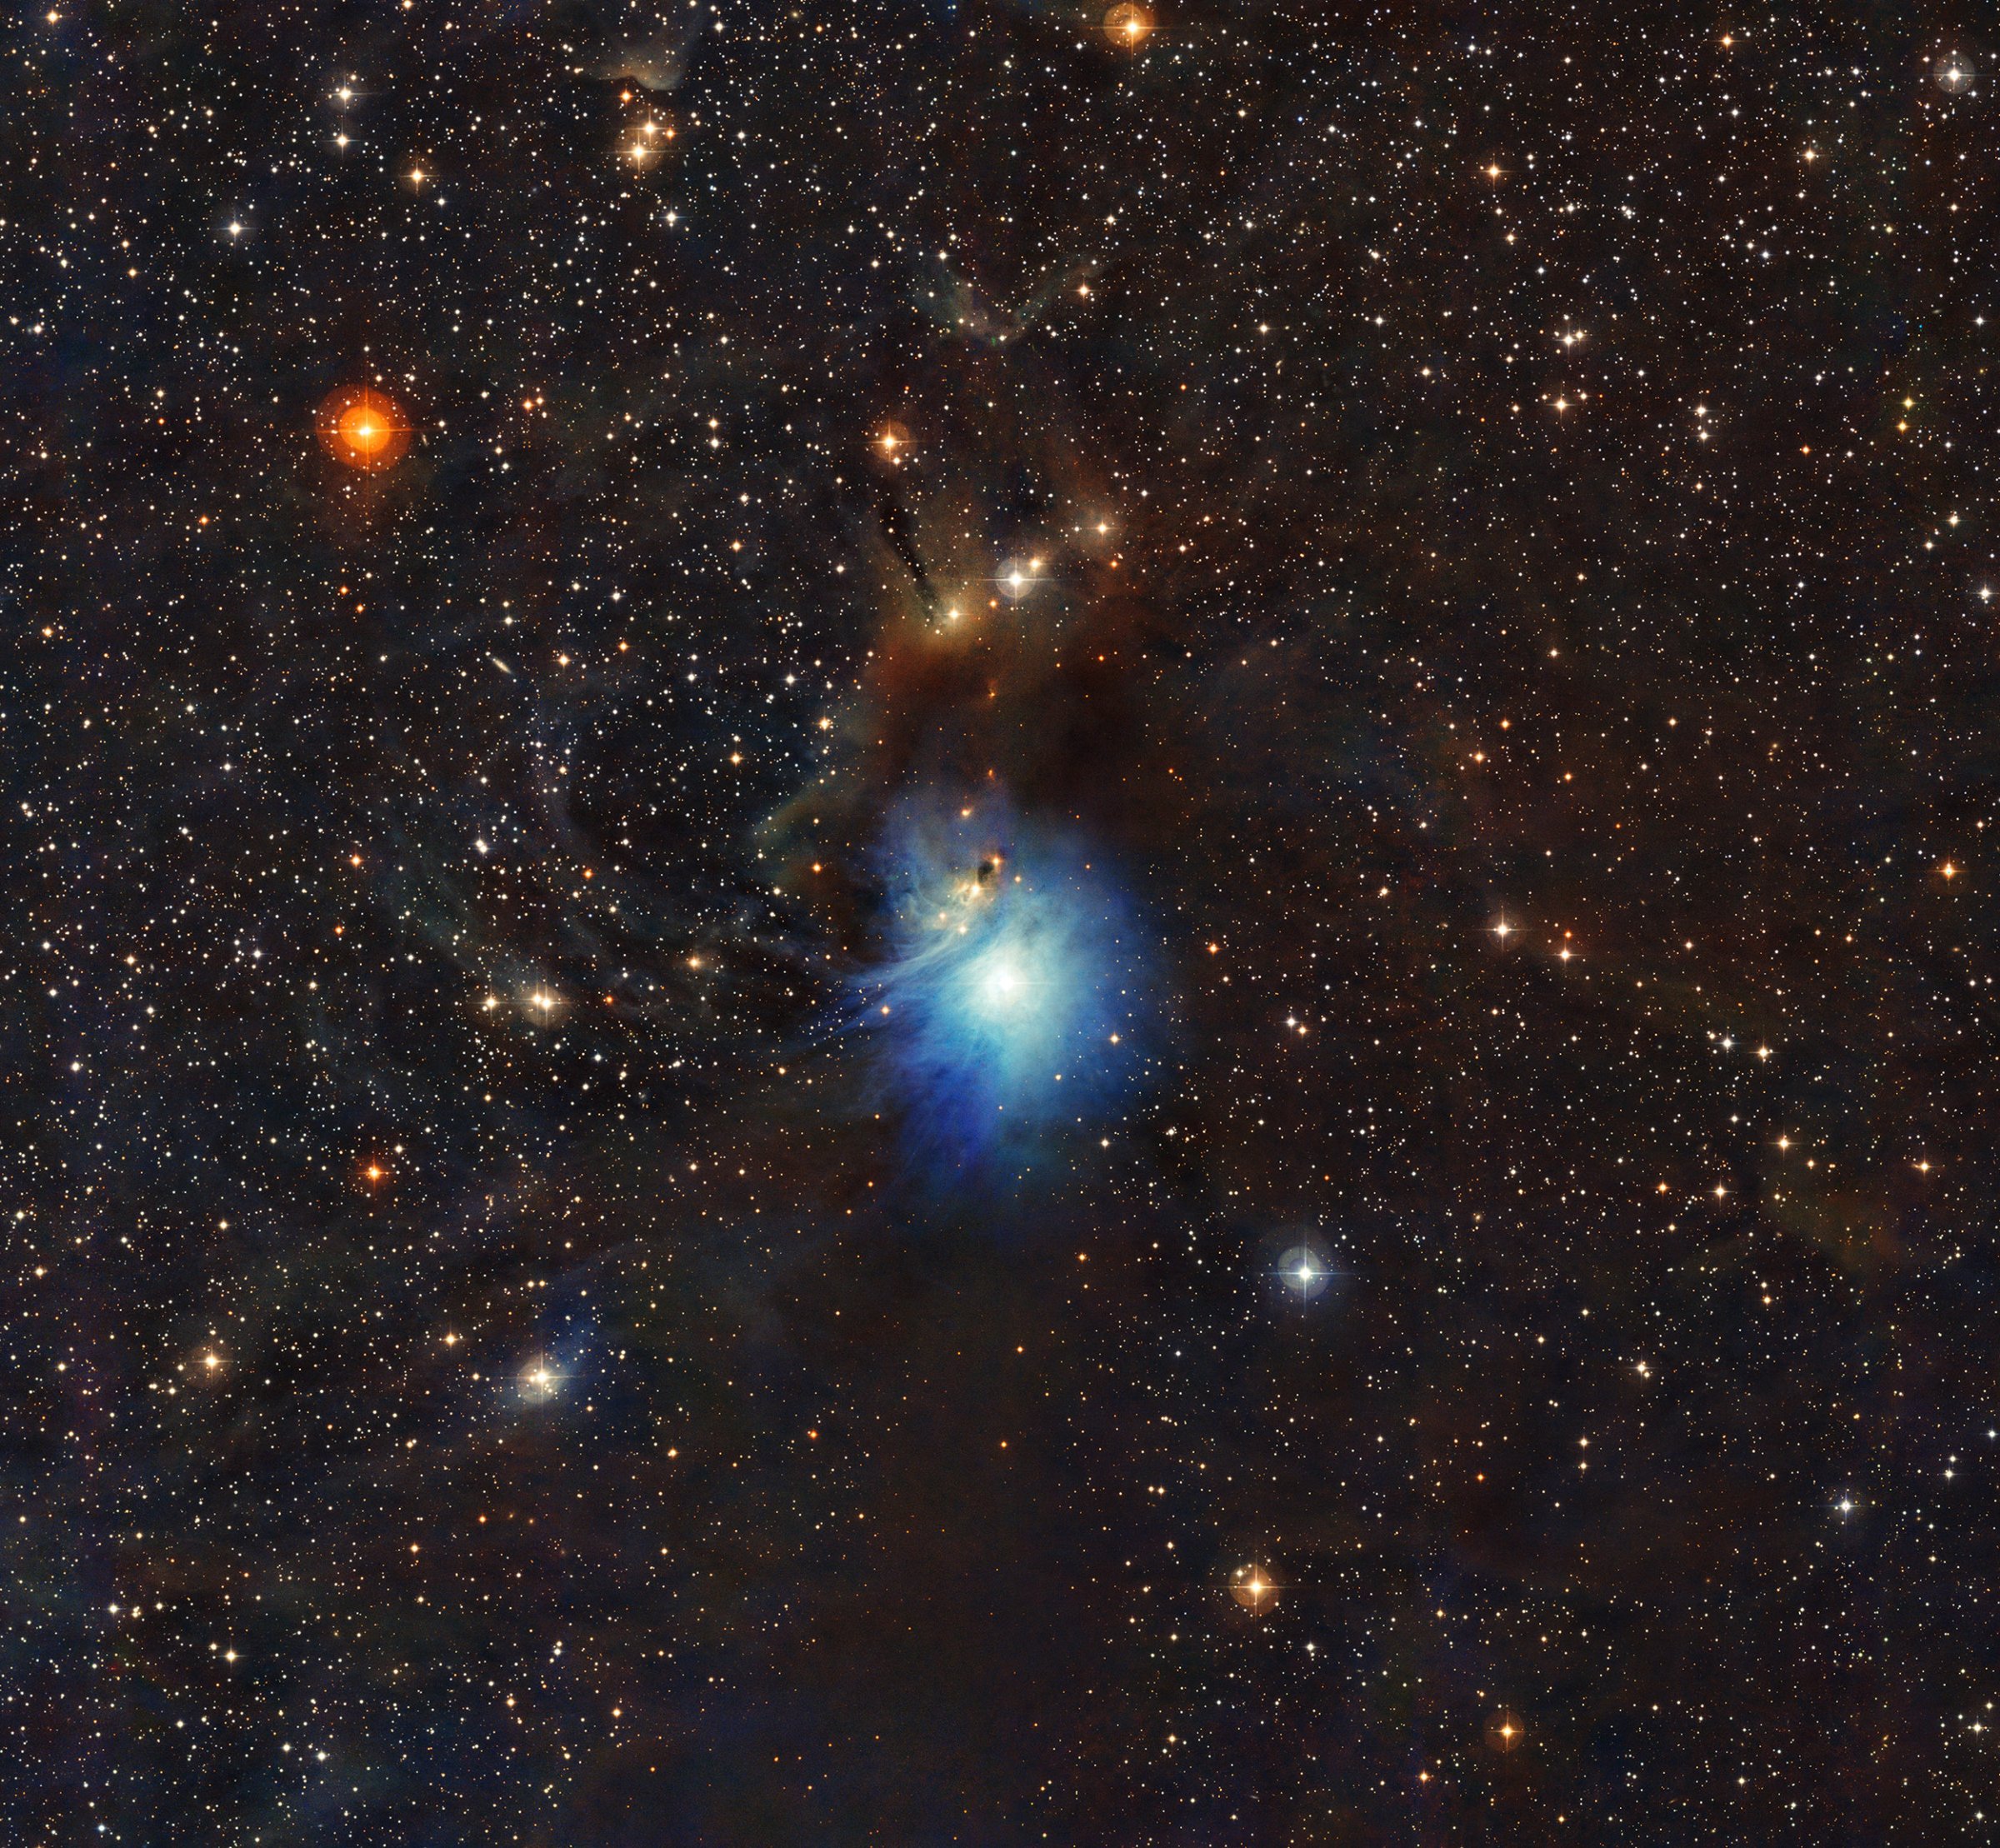 A newly formed star lights up the surrounding cosmic clouds in this image from ESO’s La Silla Observatory in Chile. Dust particles in the vast clouds that surround the star HD 97300 diffuse its light, like a car headlight in enveloping fog, and create the reflection nebula IC 2631.